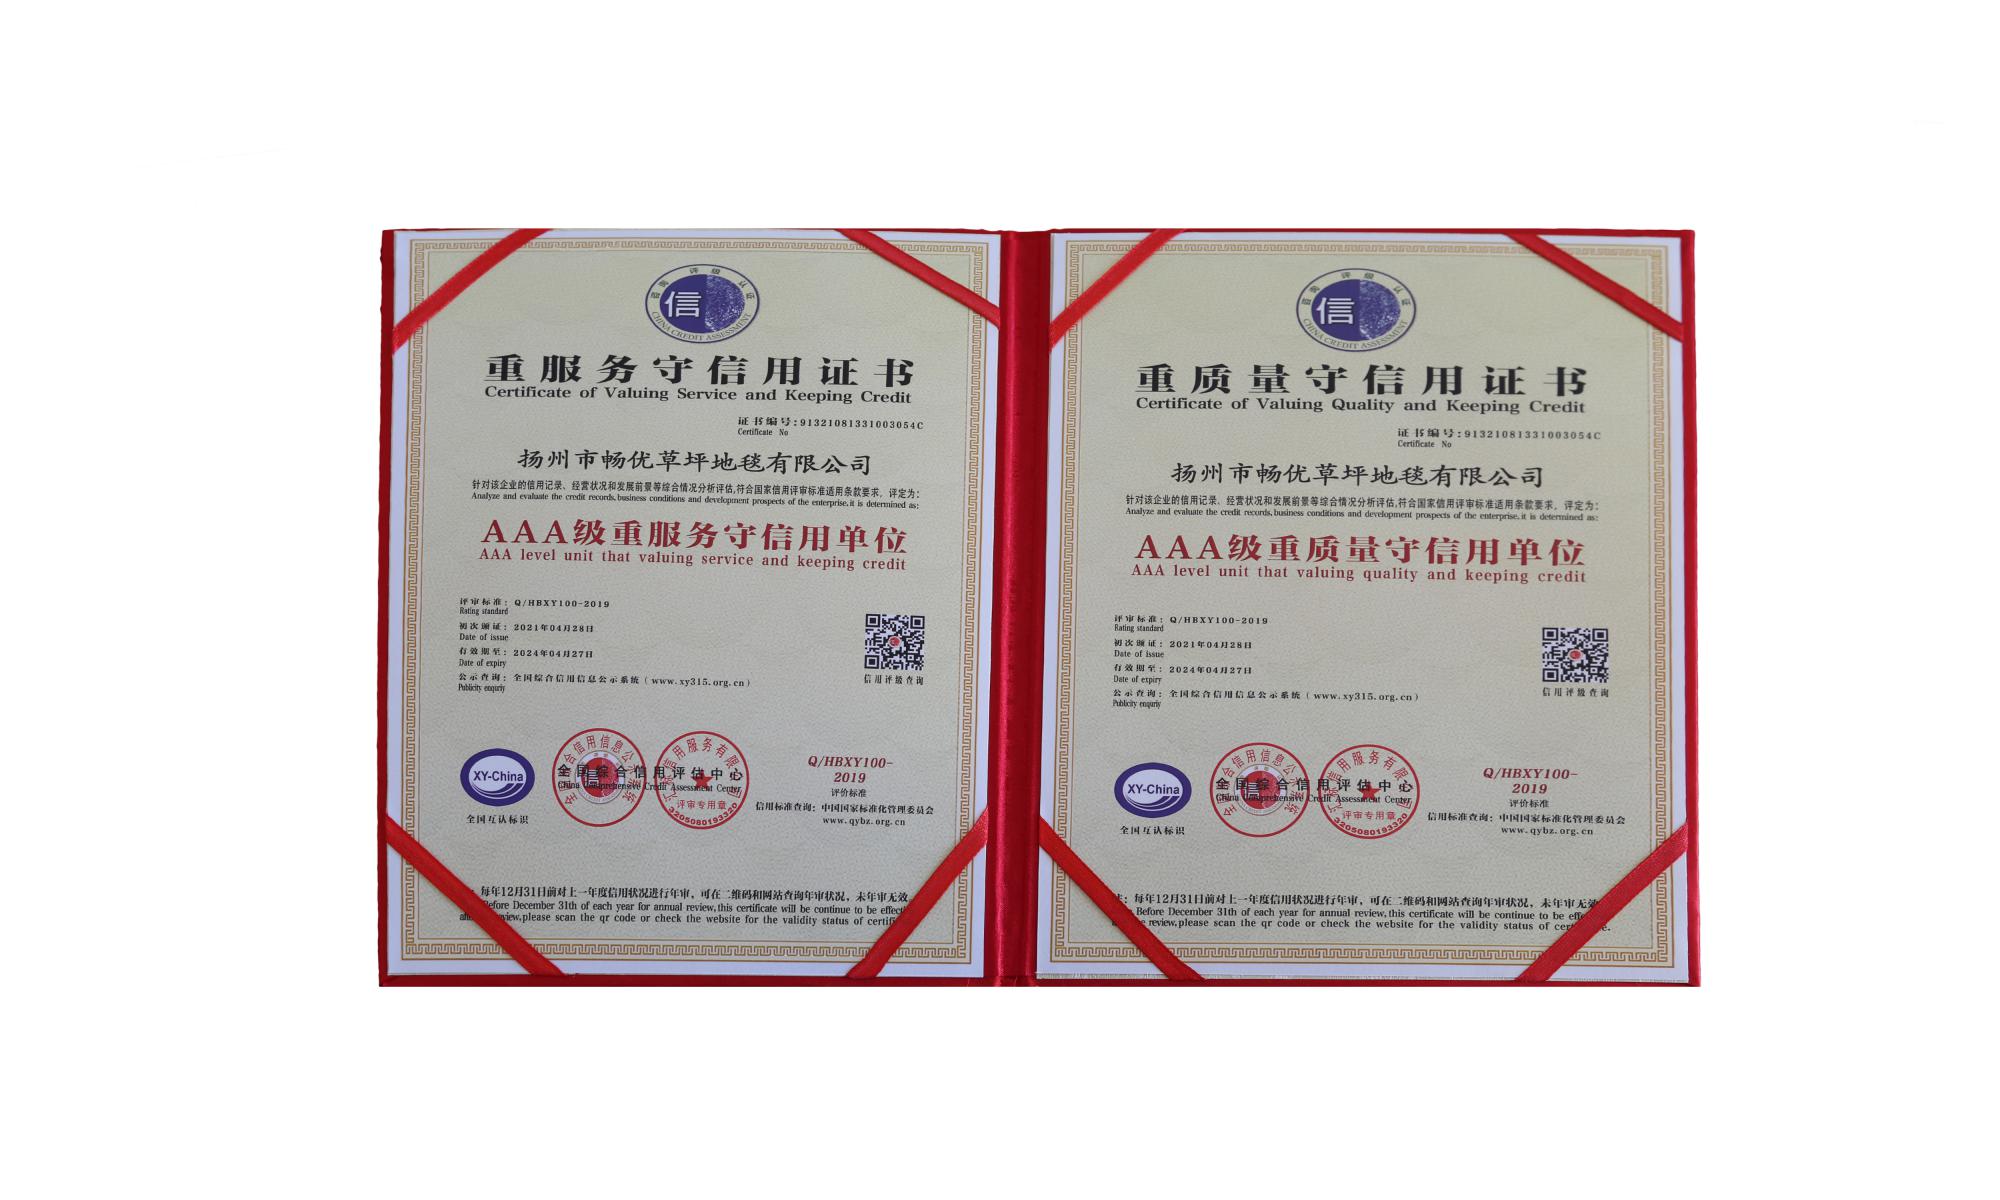 Certificate of Quality and Credit 